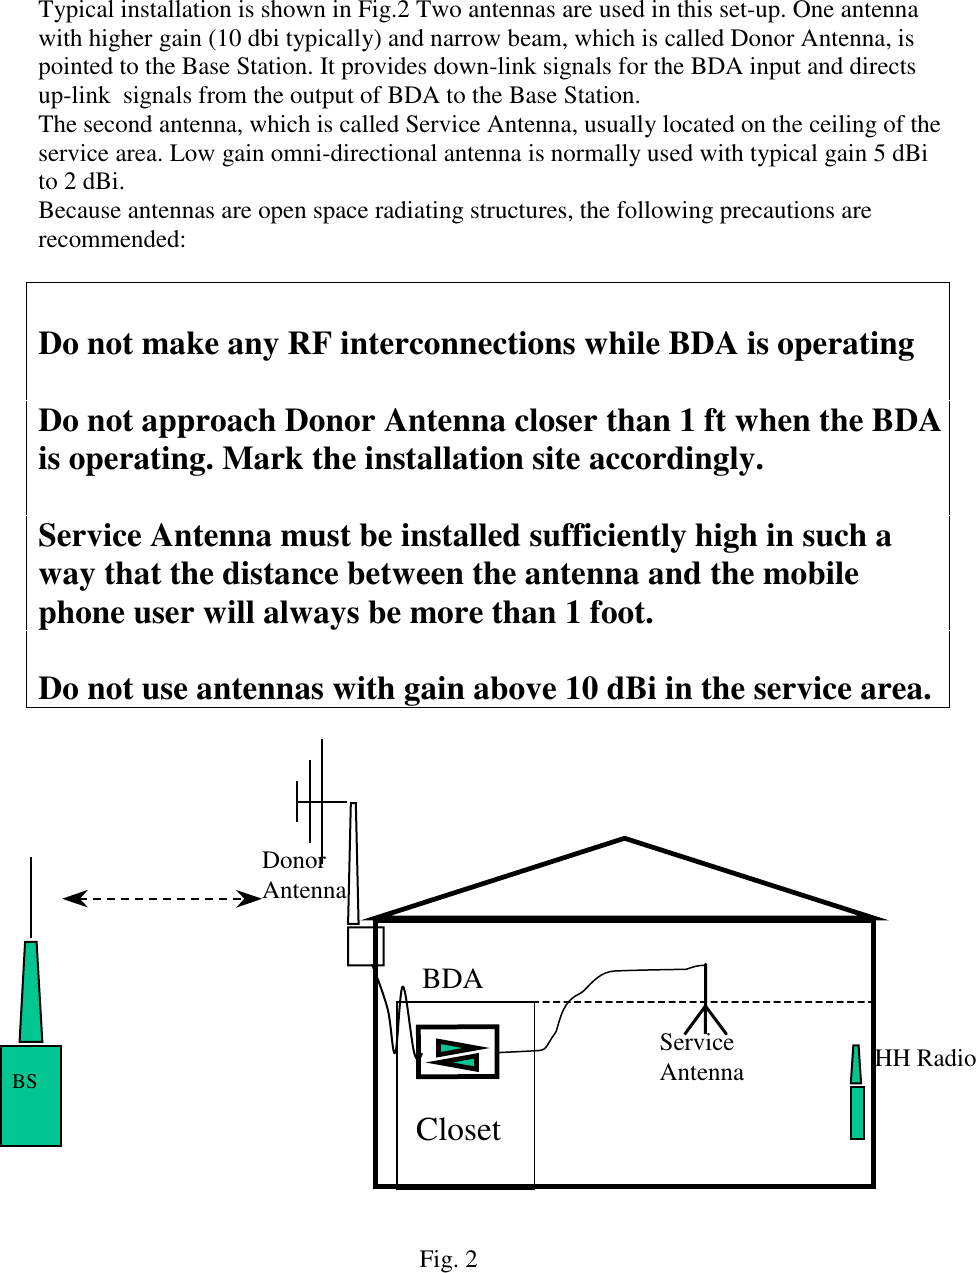 Typical installation is shown in Fig.2 Two antennas are used in this set-up. One antennawith higher gain (10 dbi typically) and narrow beam, which is called Donor Antenna, ispointed to the Base Station. It provides down-link signals for the BDA input and directsup-link  signals from the output of BDA to the Base Station.The second antenna, which is called Service Antenna, usually located on the ceiling of theservice area. Low gain omni-directional antenna is normally used with typical gain 5 dBito 2 dBi.Because antennas are open space radiating structures, the following precautions arerecommended:Do not make any RF interconnections while BDA is operatingDo not approach Donor Antenna closer than 1 ft when the BDAis operating. Mark the installation site accordingly.Service Antenna must be installed sufficiently high in such away that the distance between the antenna and the mobilephone user will always be more than 1 foot.Do not use antennas with gain above 10 dBi in the service area.                                                             Fig. 2BS HH RadioDonorAntenna  ClosetBDAServiceAntenna